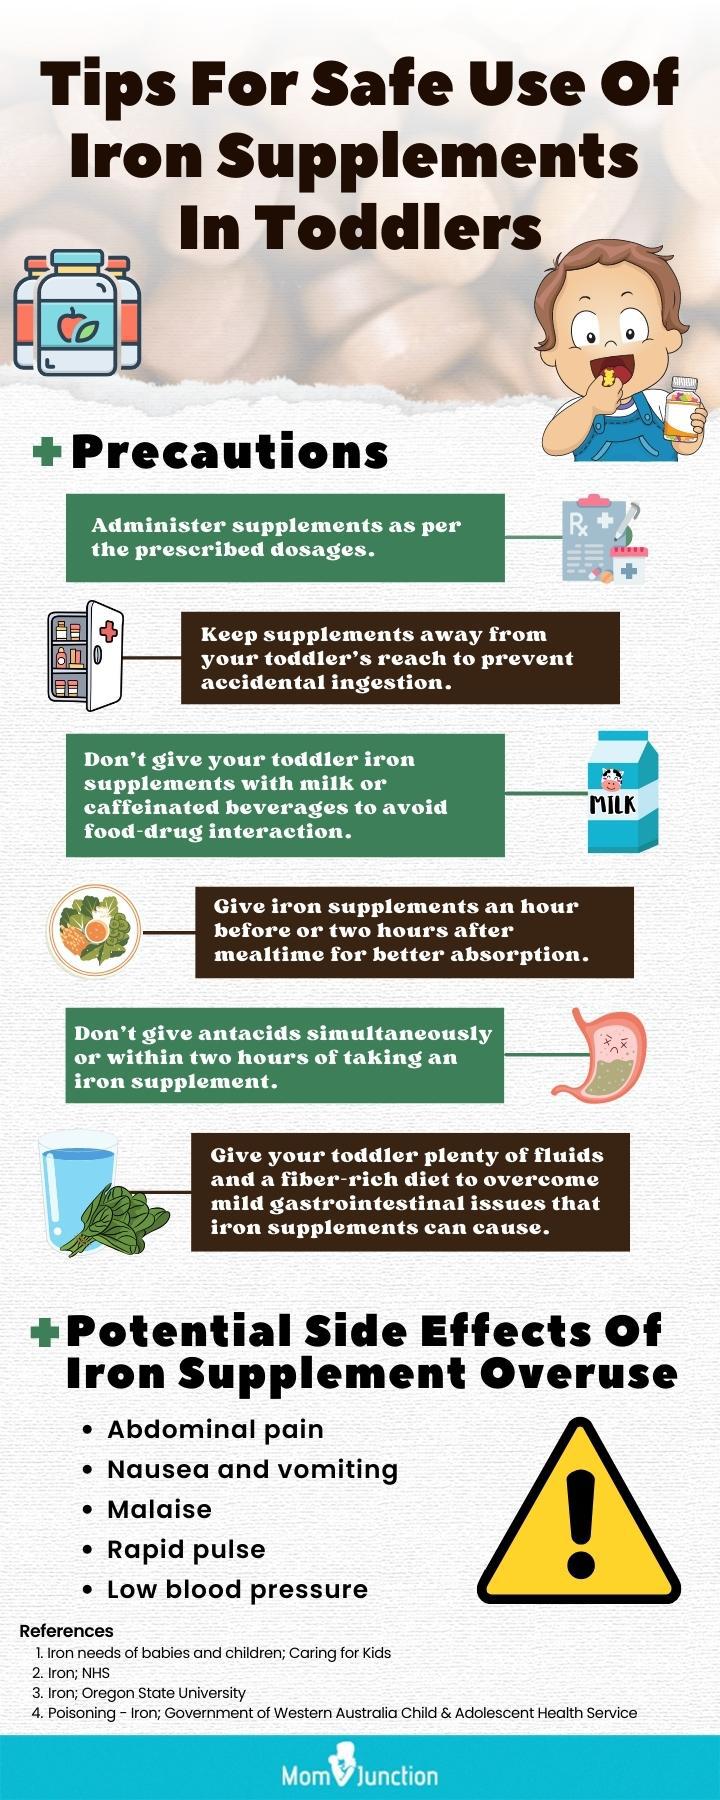 tips for safe use for iron supplements in toddlers [infographic]